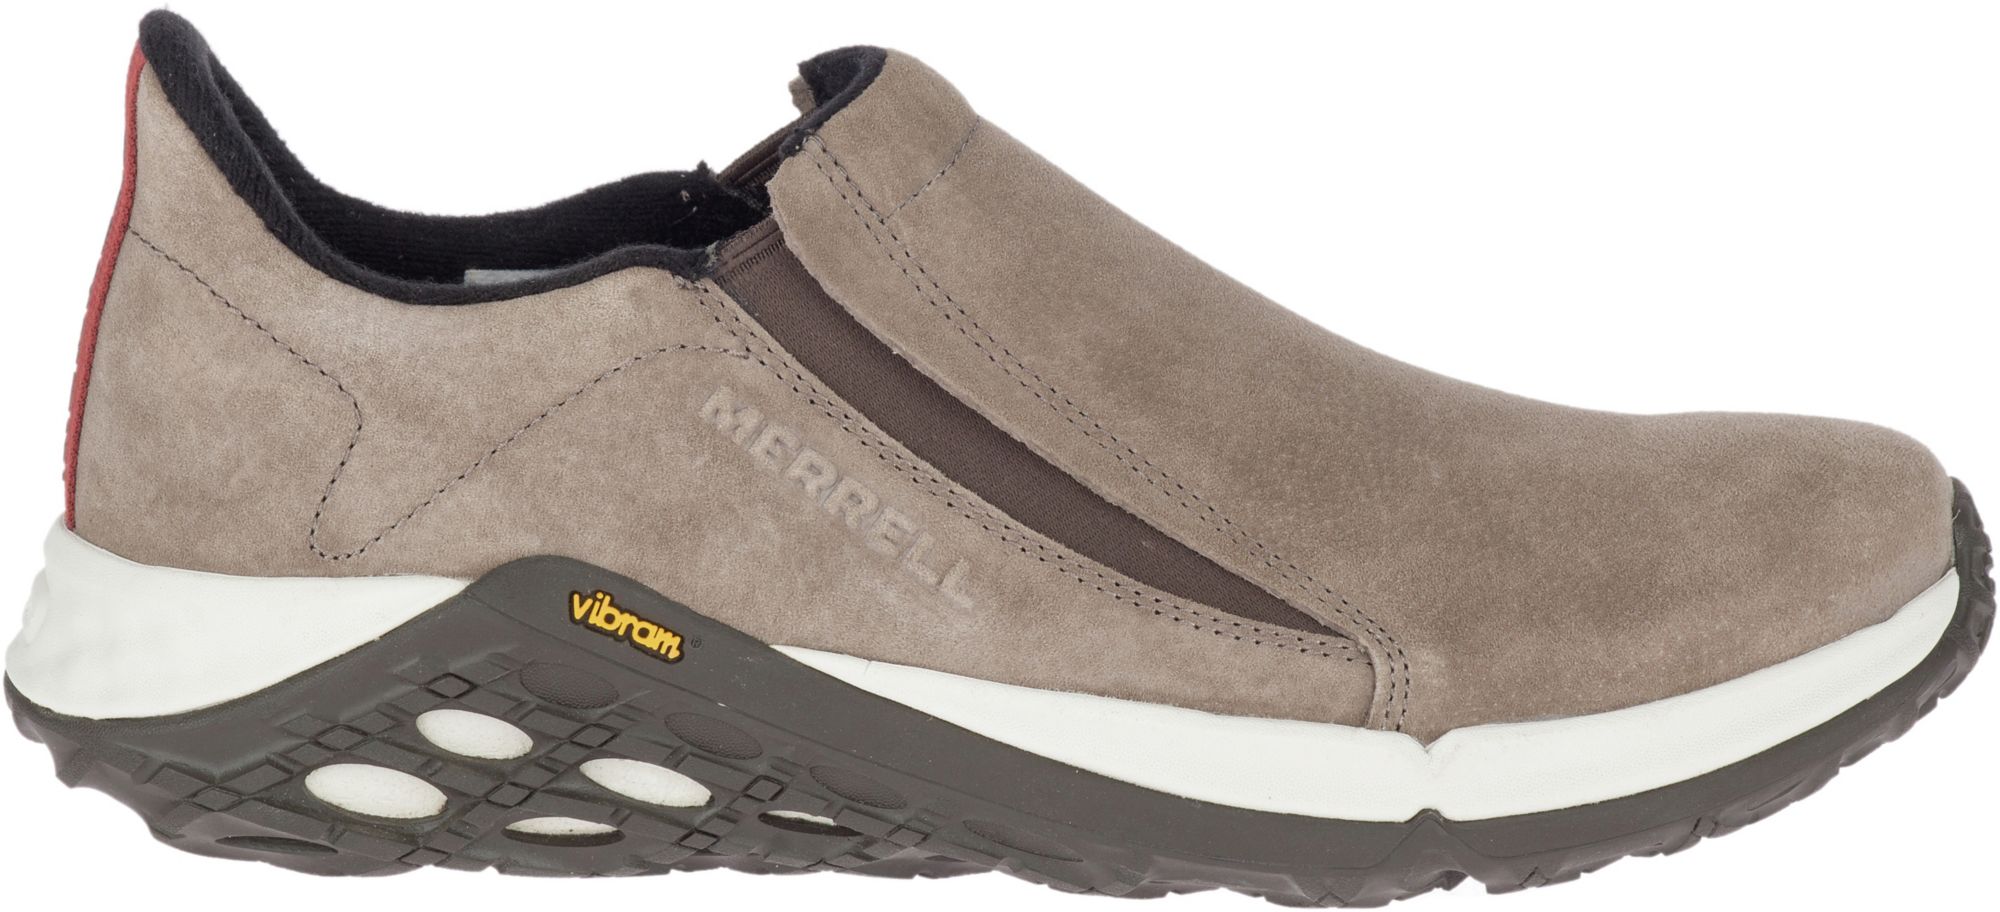 merrell casual shoes